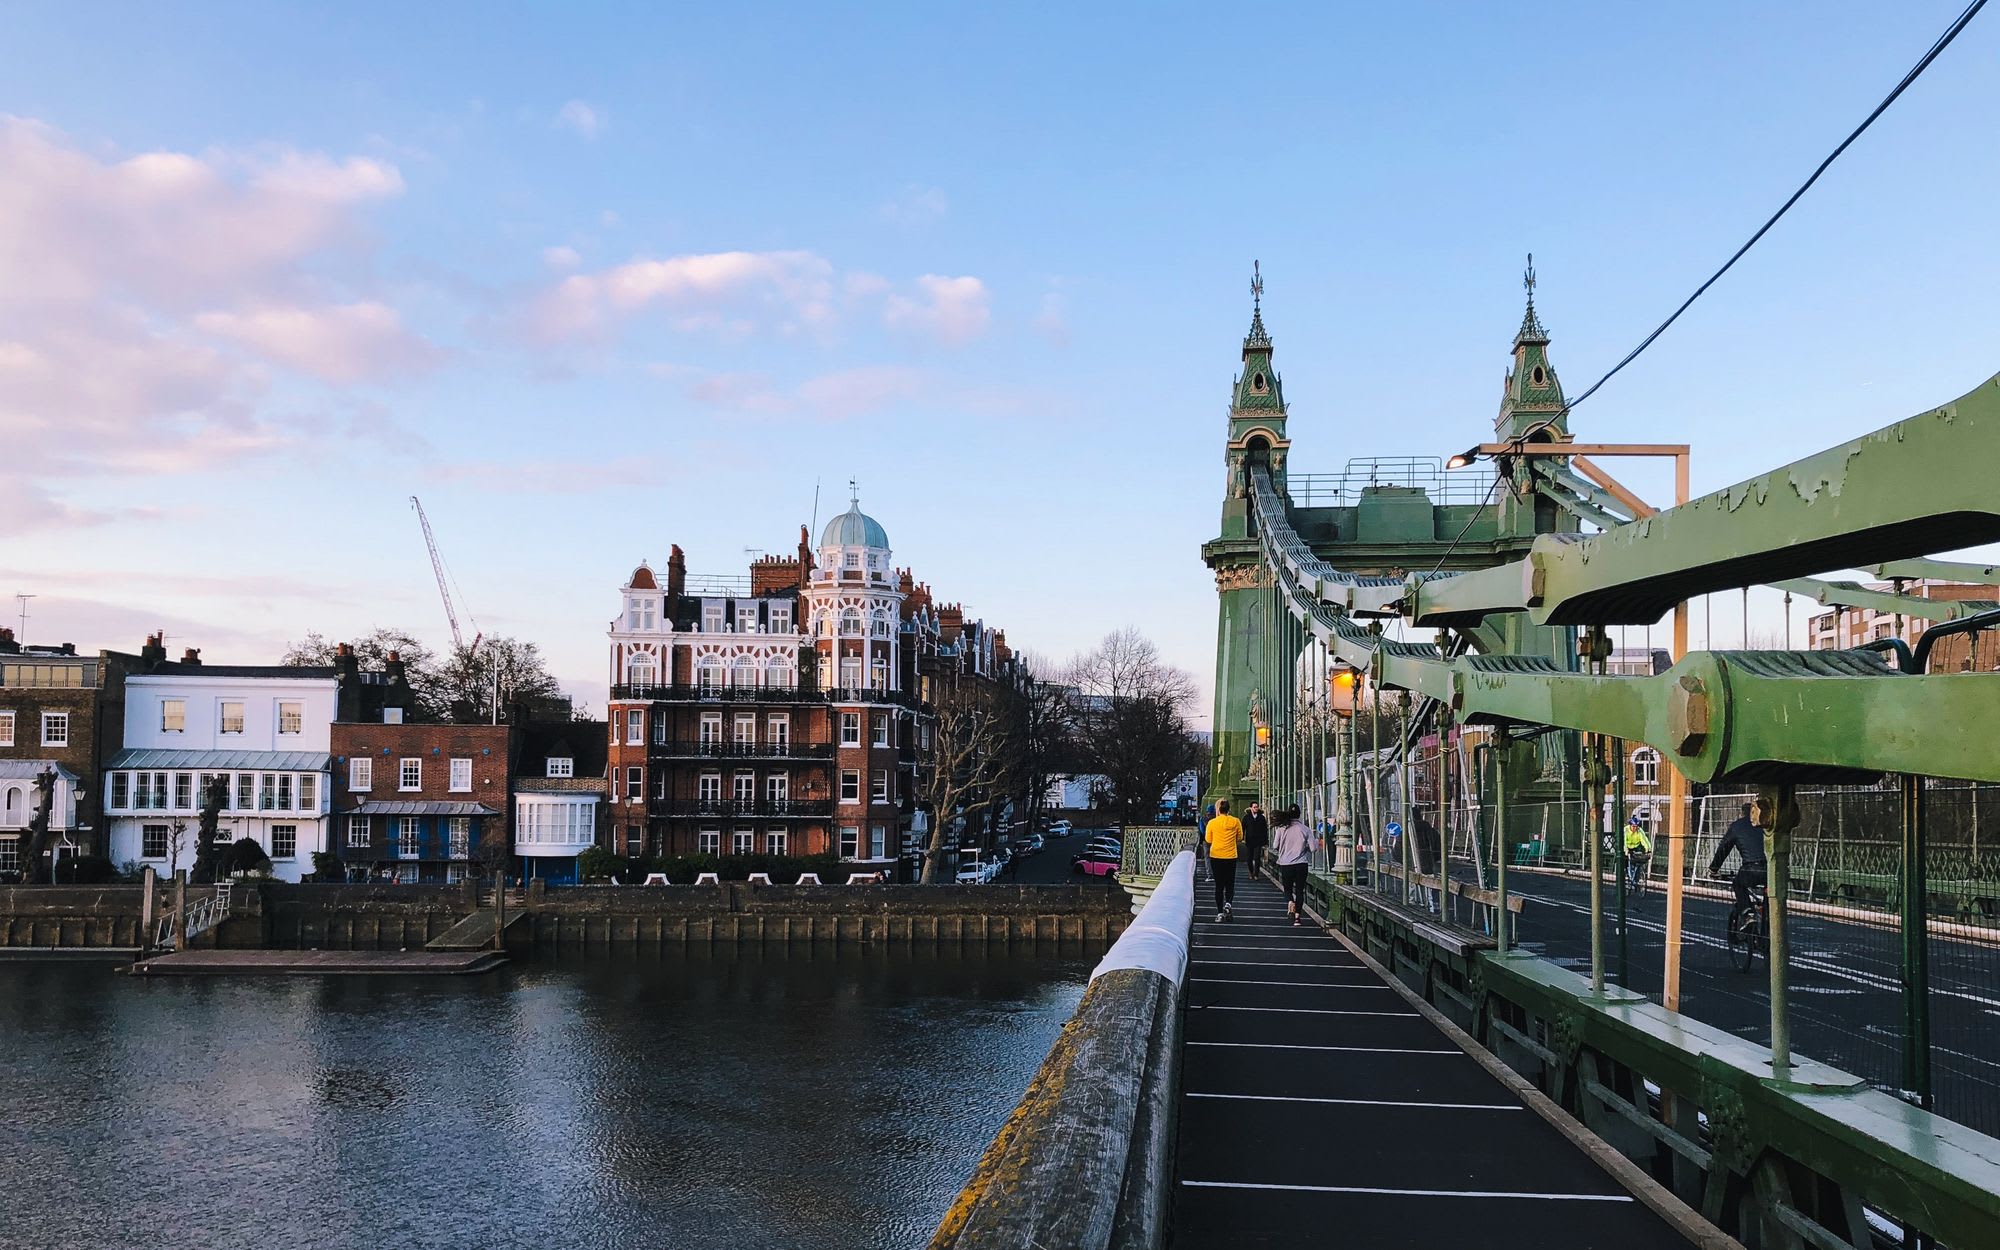 Walkway on Hammersmith Bridge with painted lines and walkers